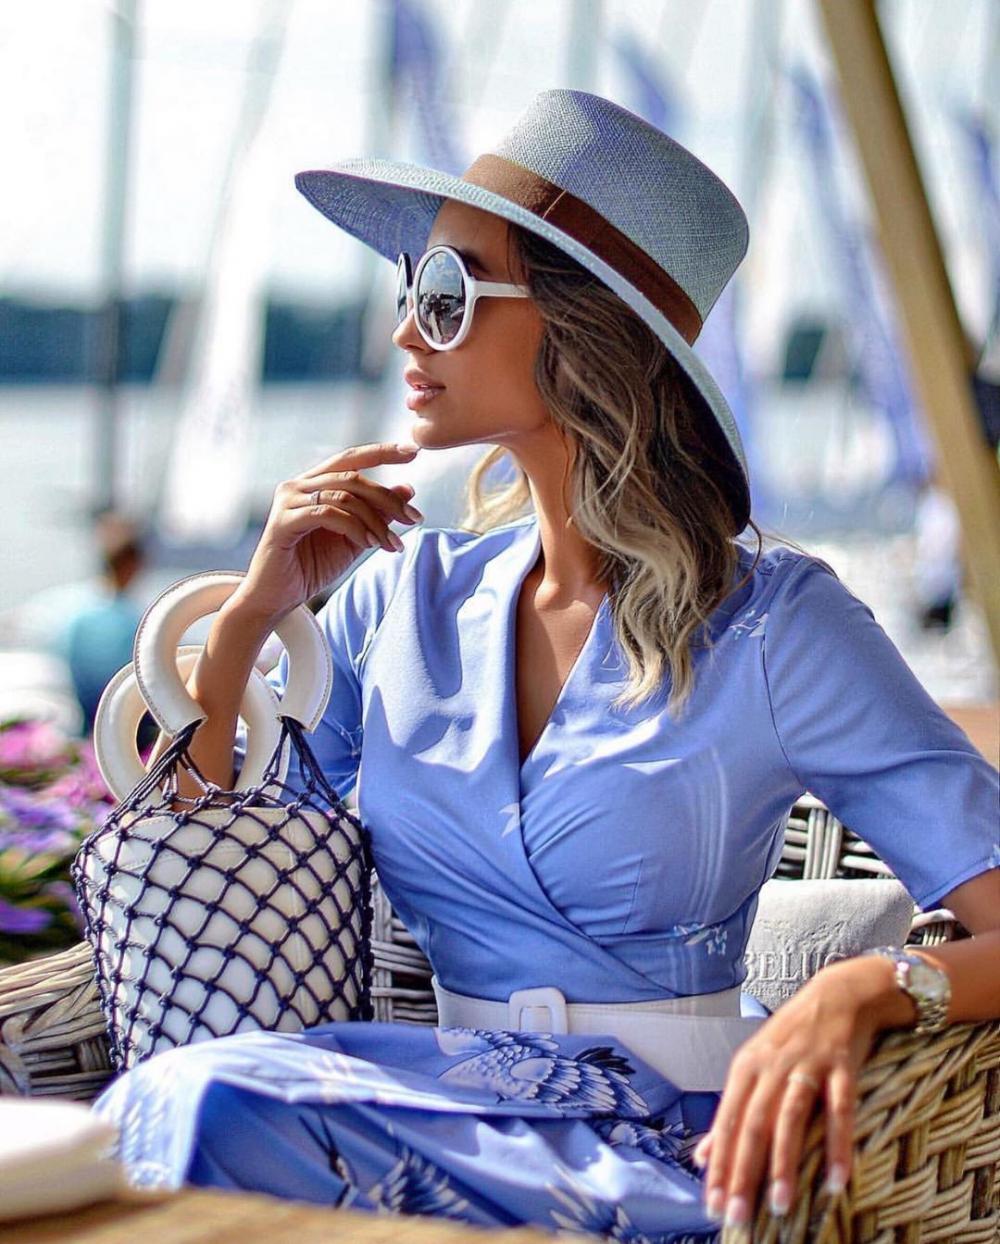 A hat in summer is an important accessory for a real fashionista. We look at the main trends of this season